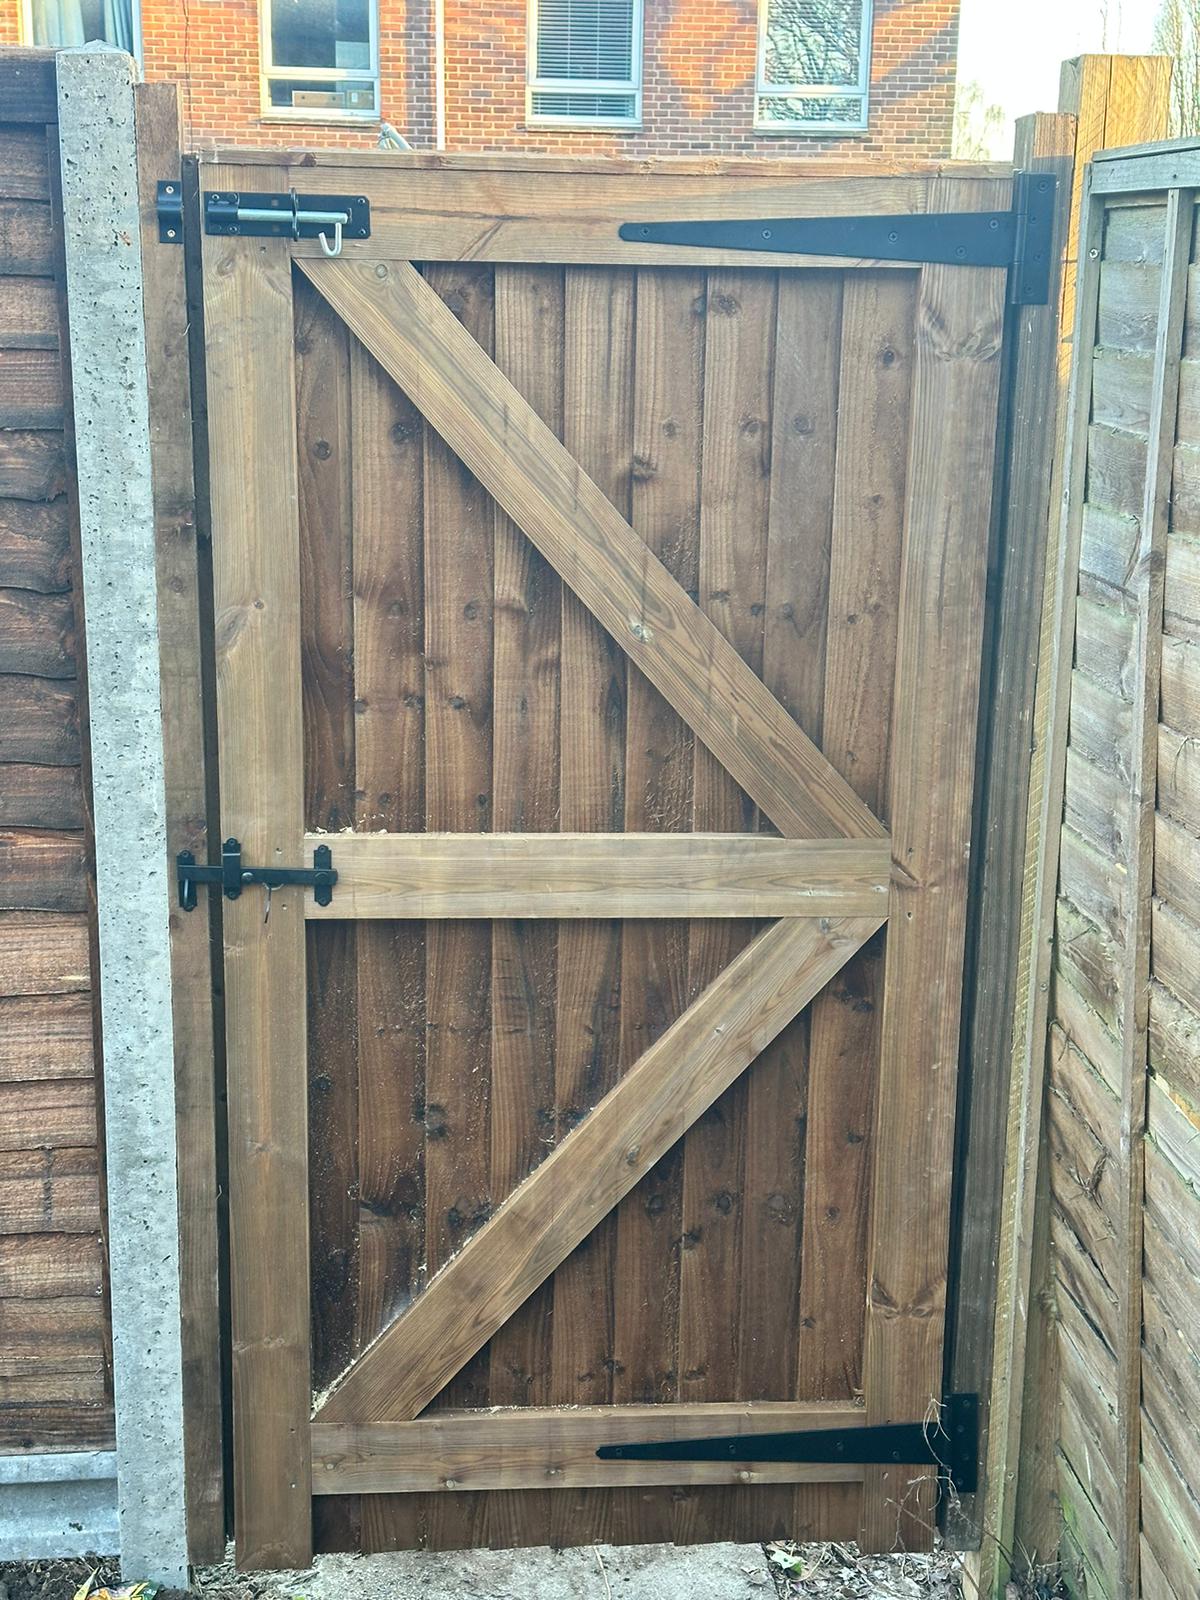 An image showing a new brown wooden garden gate.